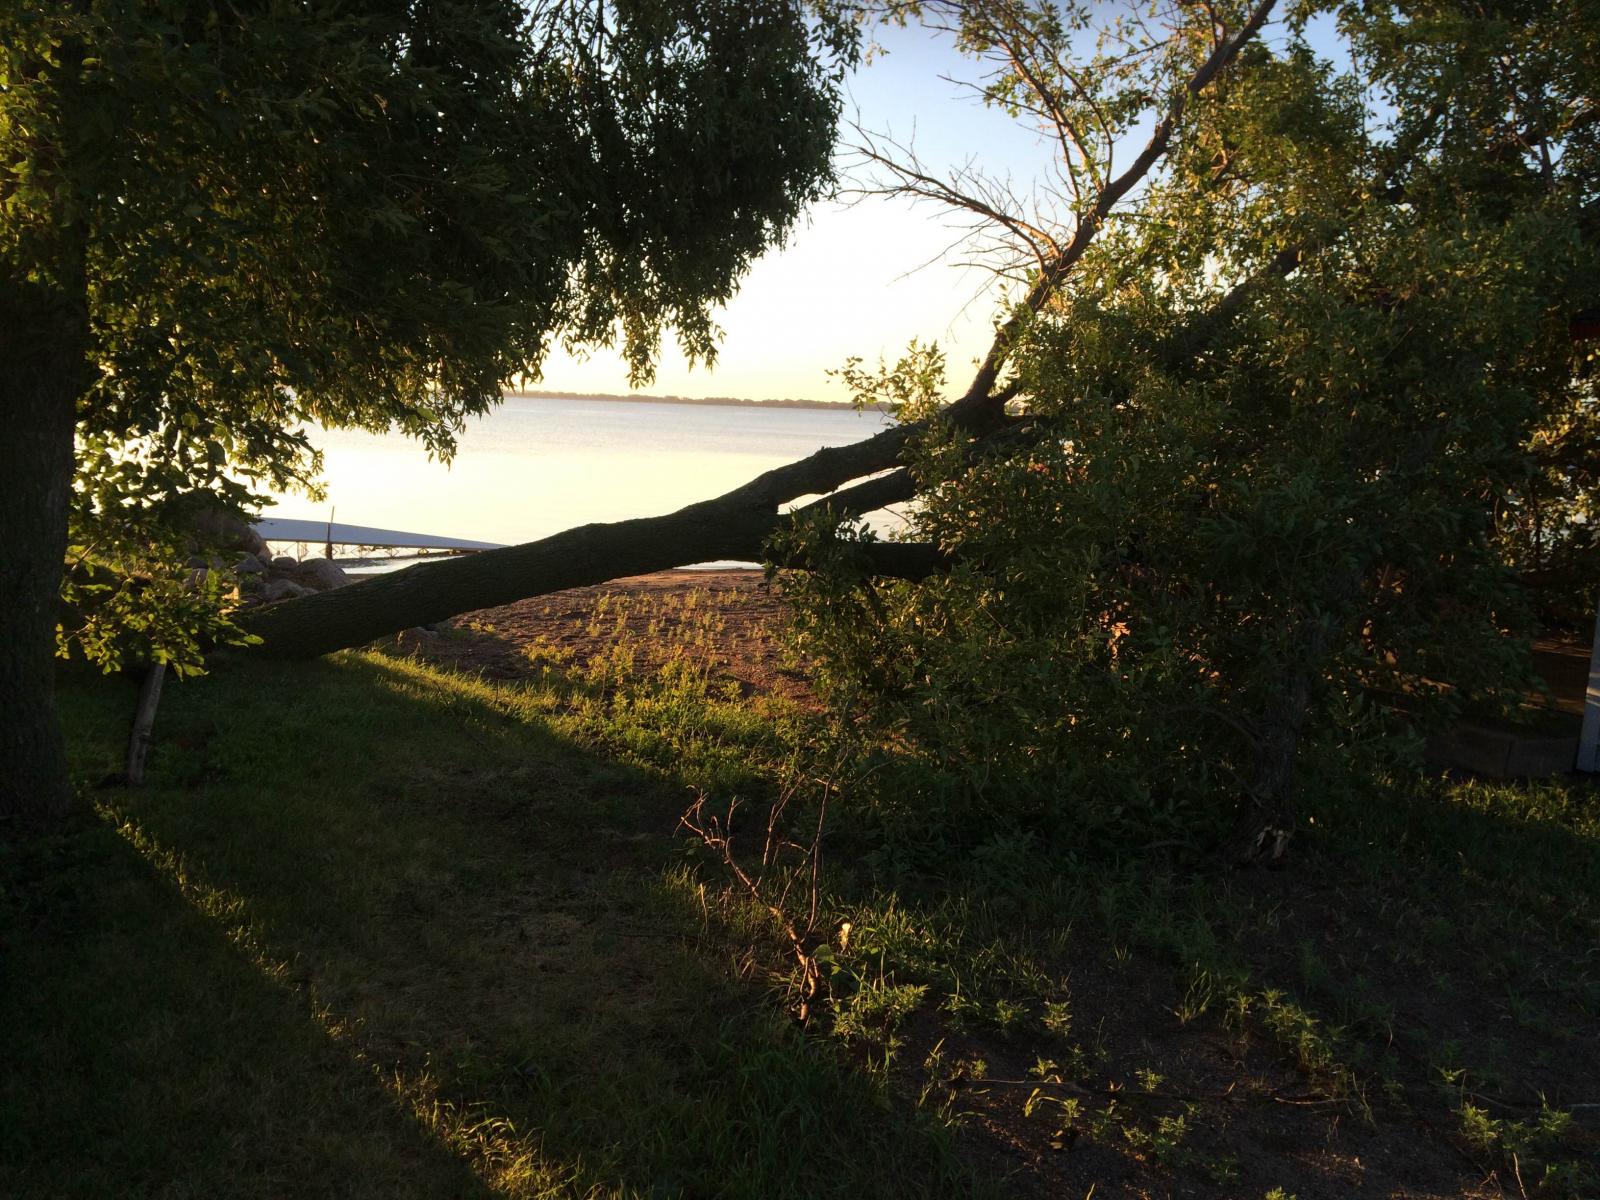 Damage at Lake Poinsett - Photo by Dave Schaefer